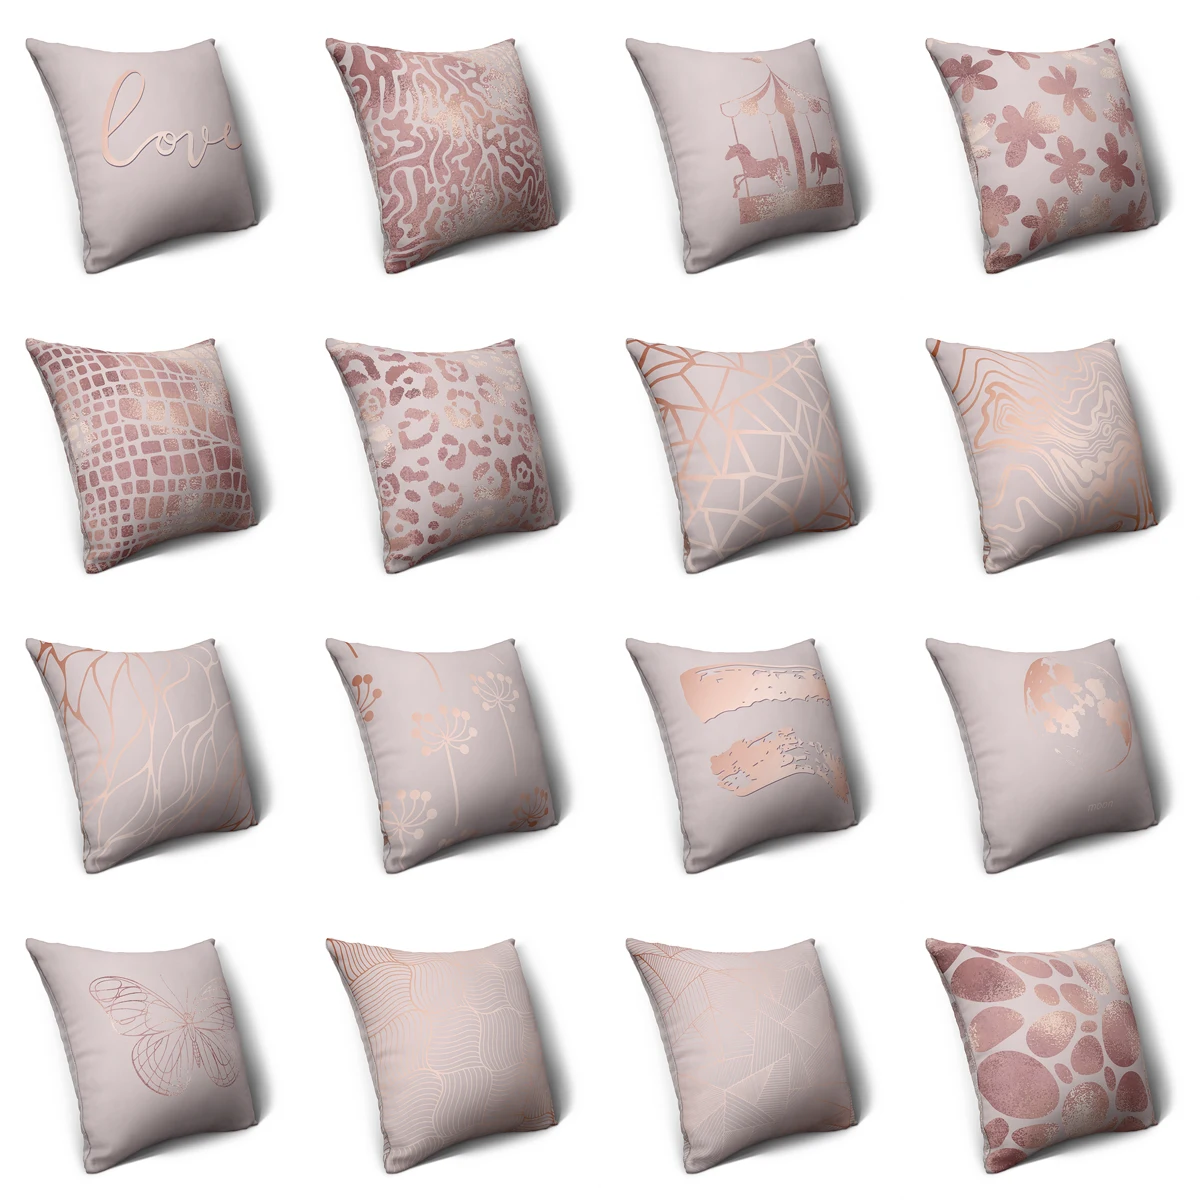 

ZHENHE Abstract Rose Gold Geometry Pillow Case Double Sided Printing Cushion Cover for Bedroom Sofa Decor 18x18 Inch（45x45cm）